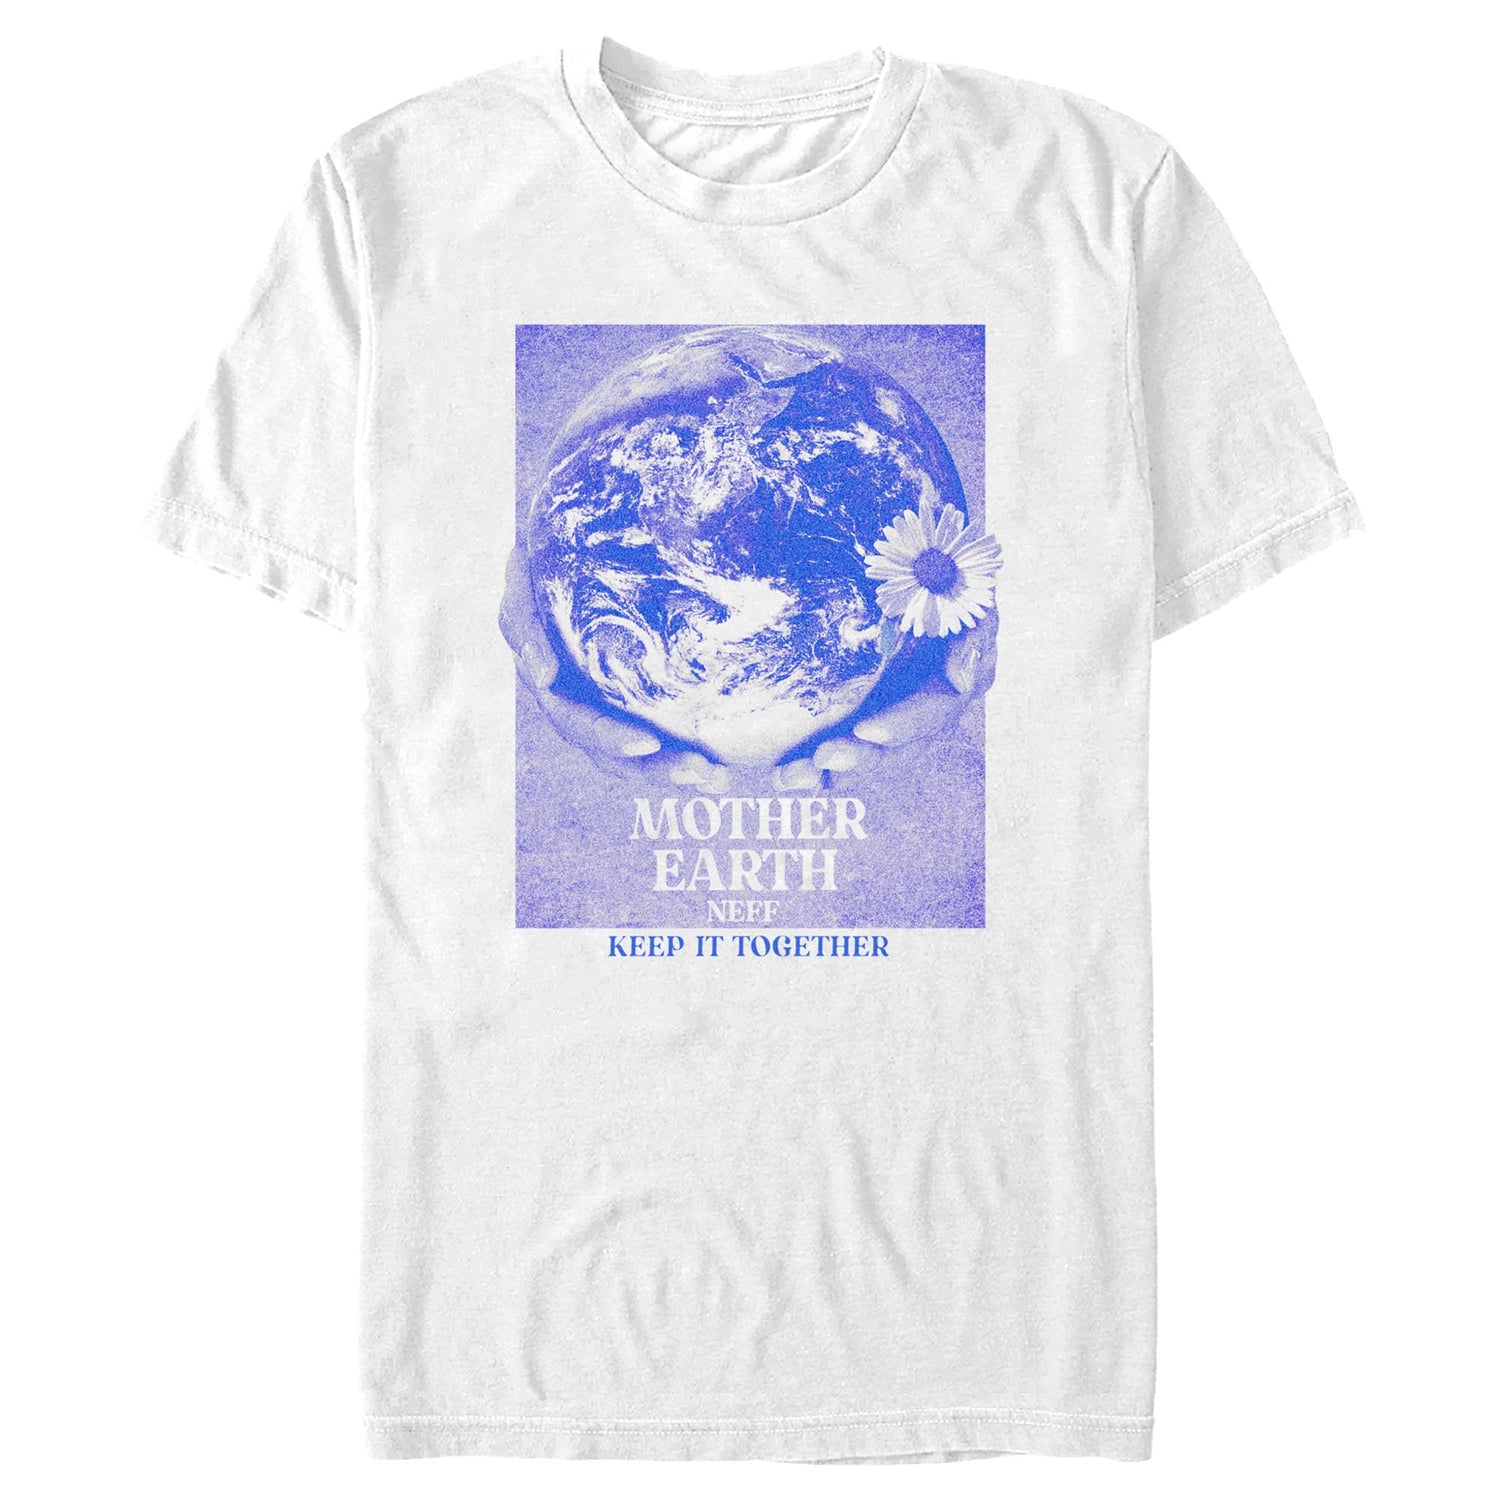 Men's NEFF Mother Earth Keep it Together T-Shirt